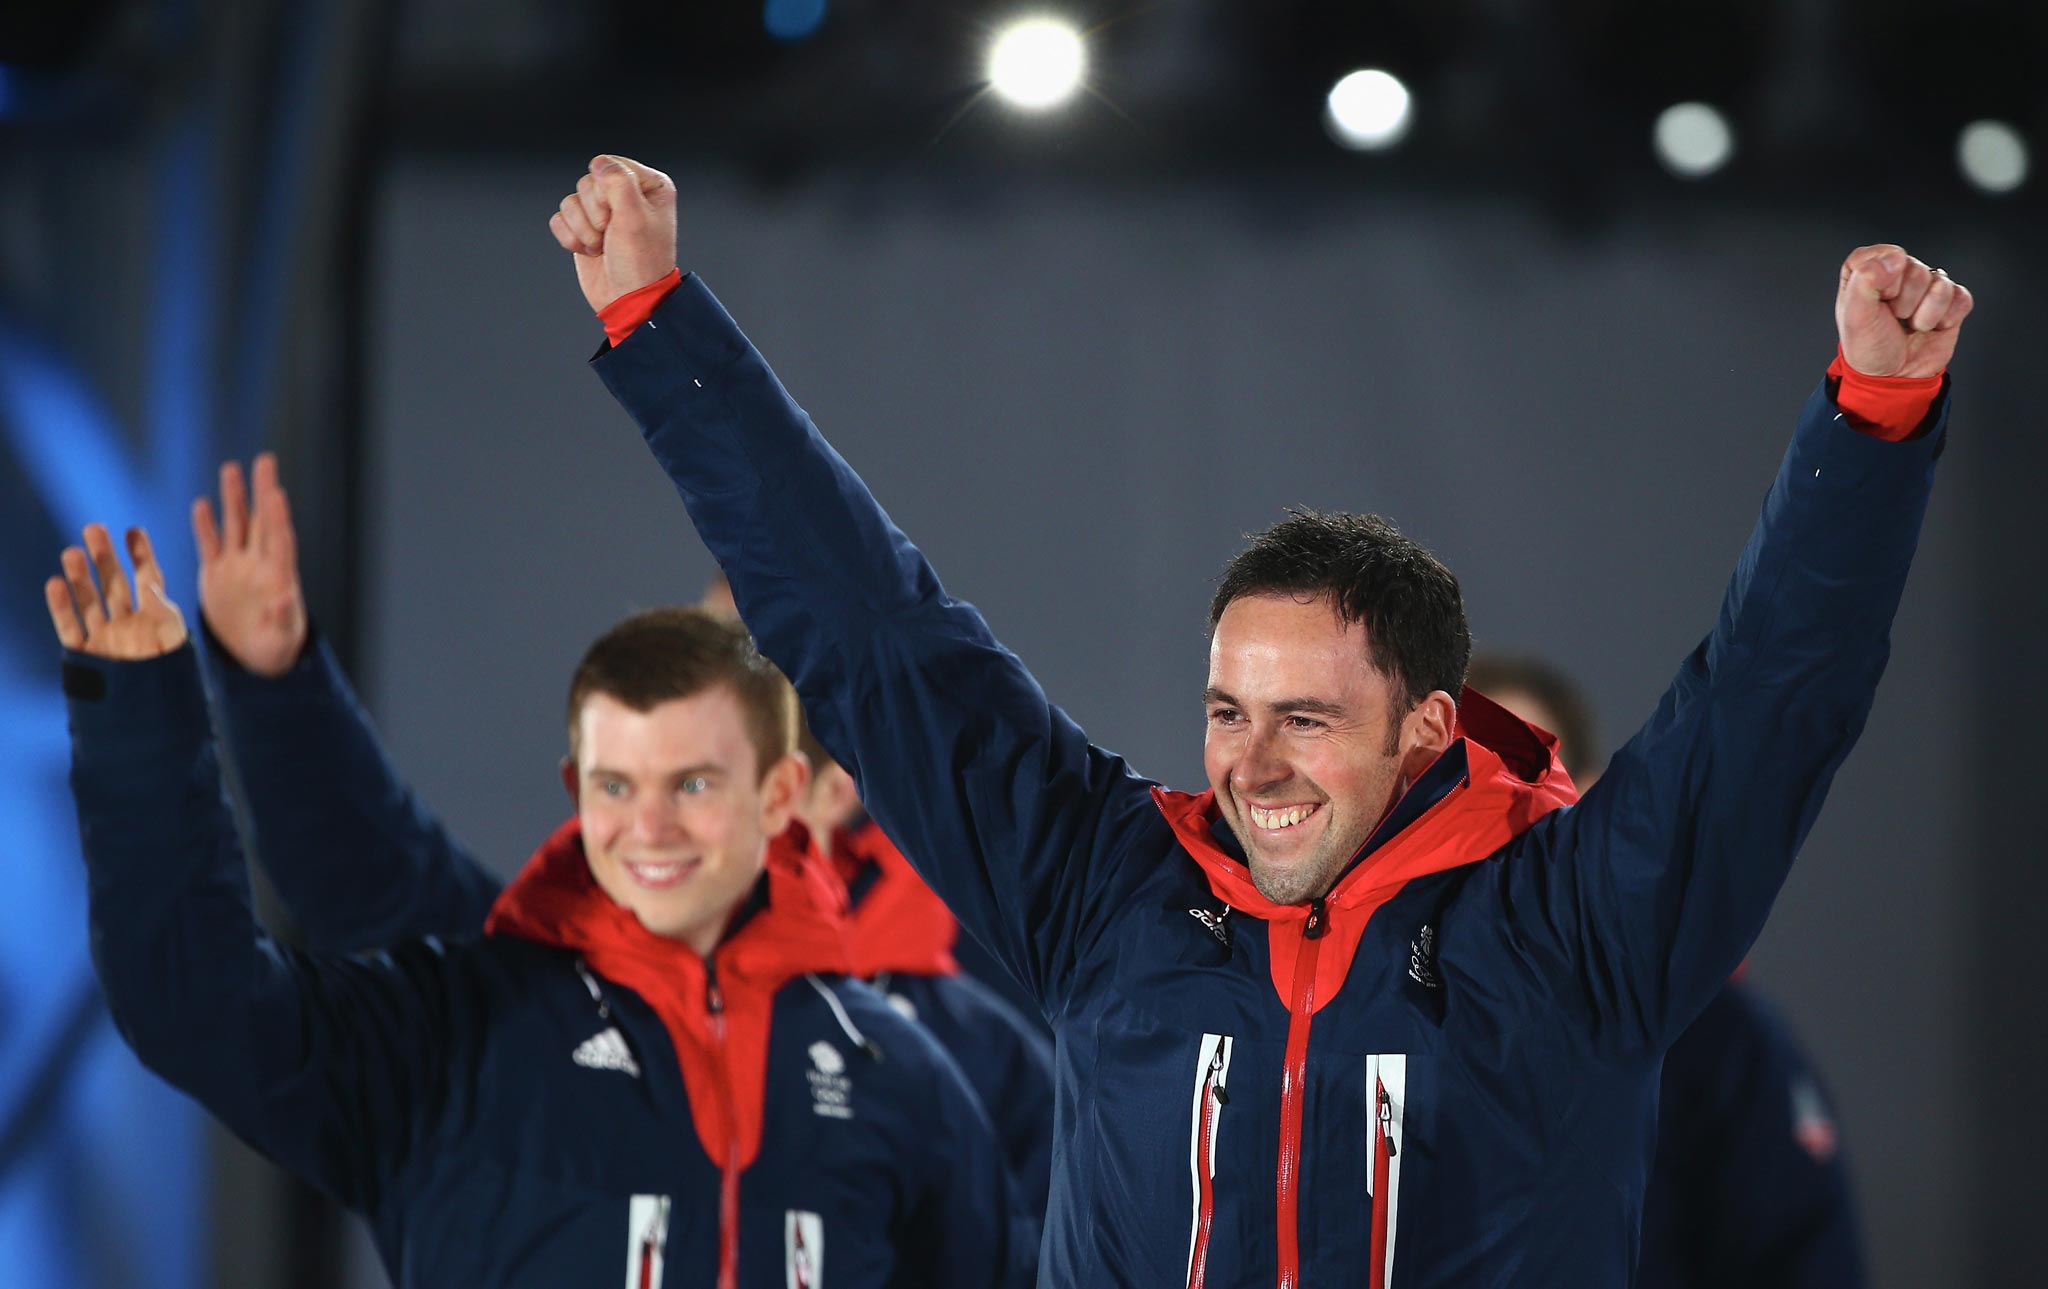 Silver medalist David Murdoch of Great Britain celebrates during the medal ceremony for Men's Curling